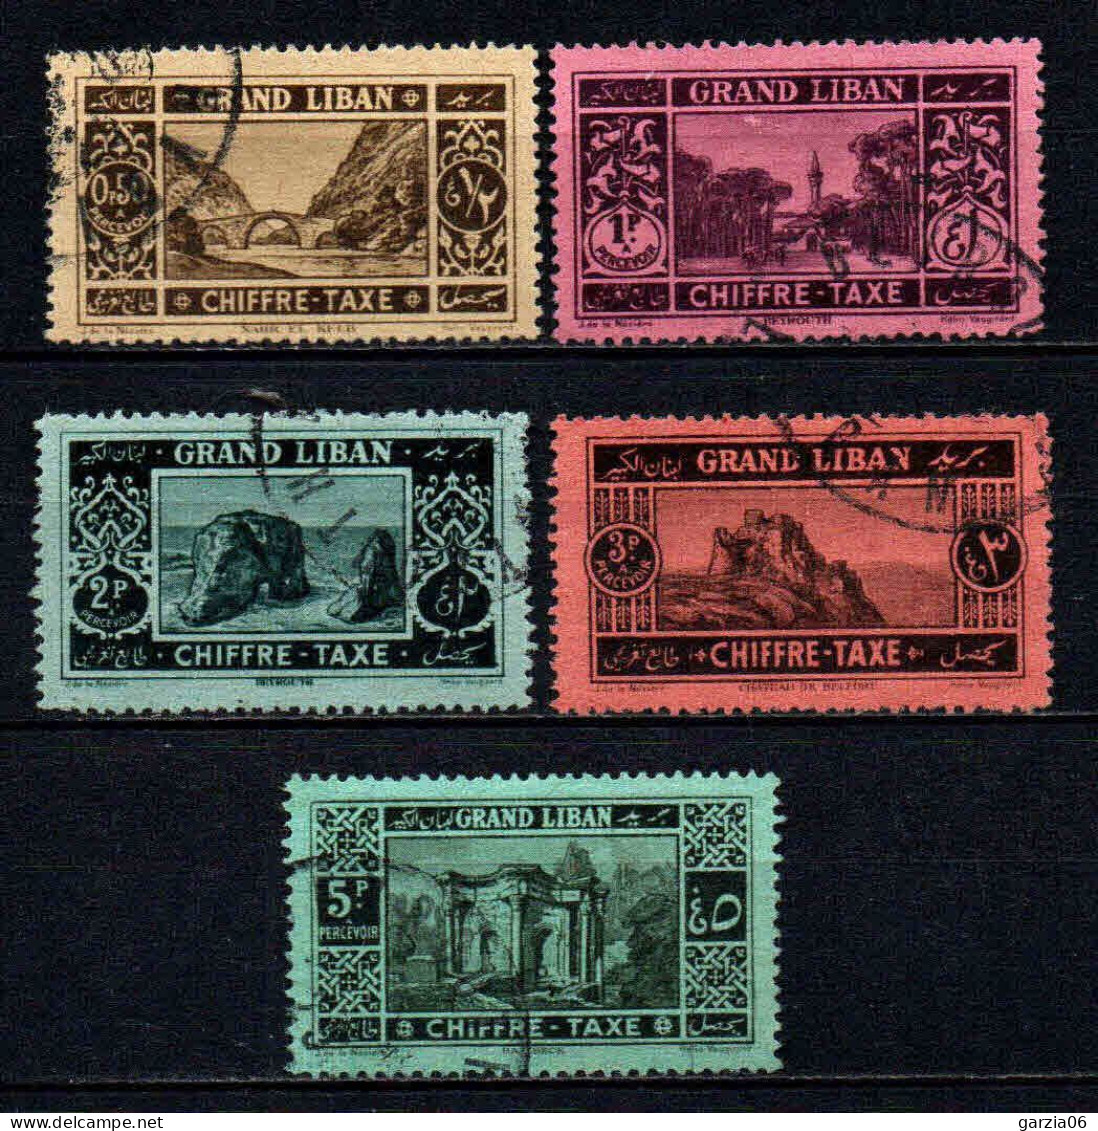 Grand Liban - 1925 - Tb Taxe 11 à 15  - Oblit - Used - Timbres-taxe